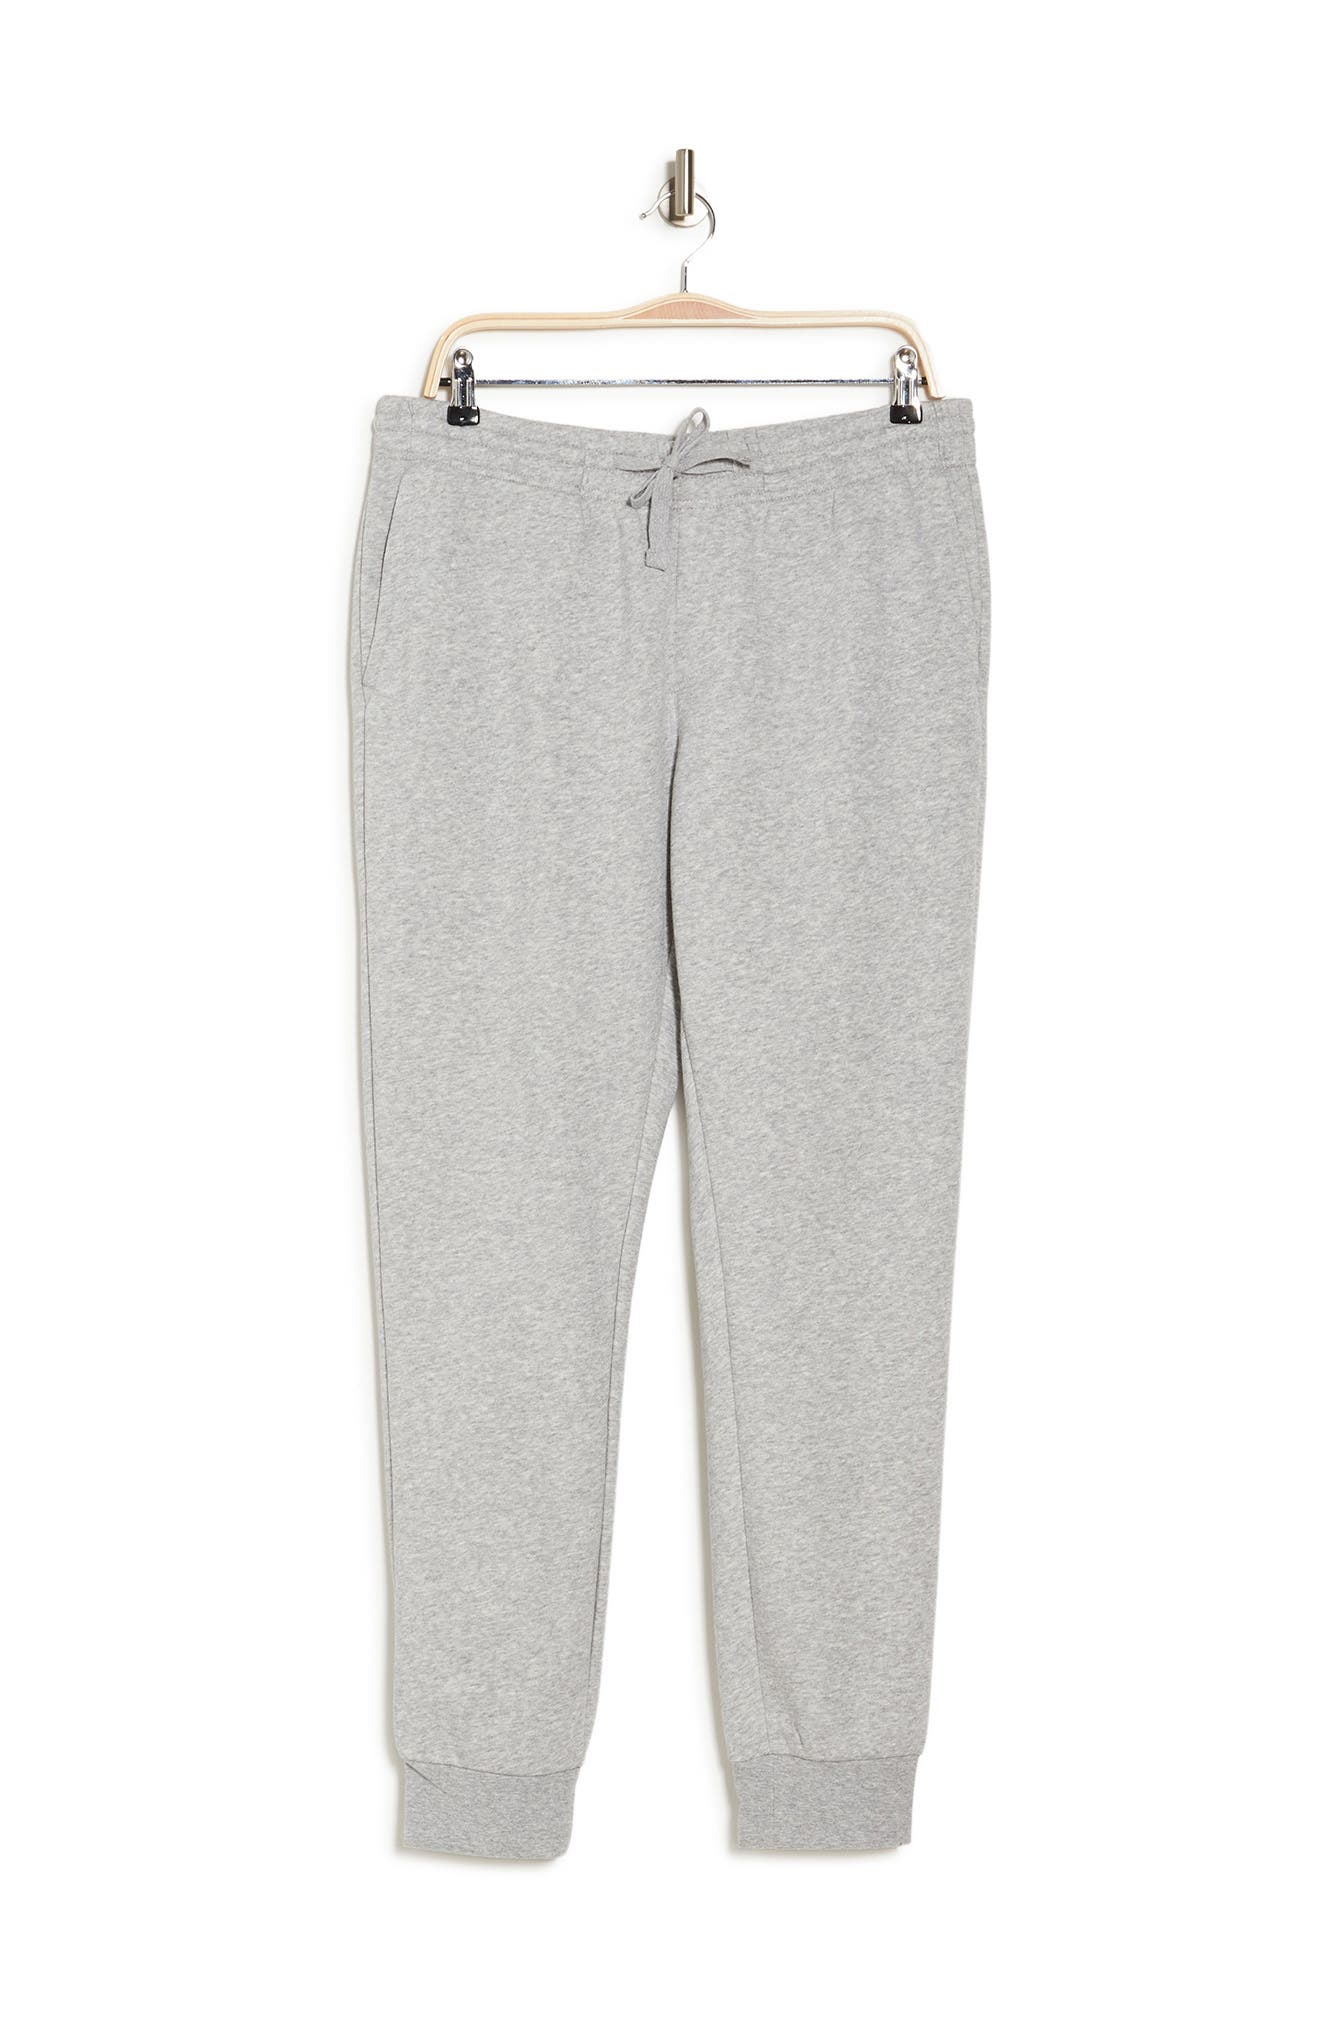 Abound Fleece Knit Drawstring Joggers In Grey Heather